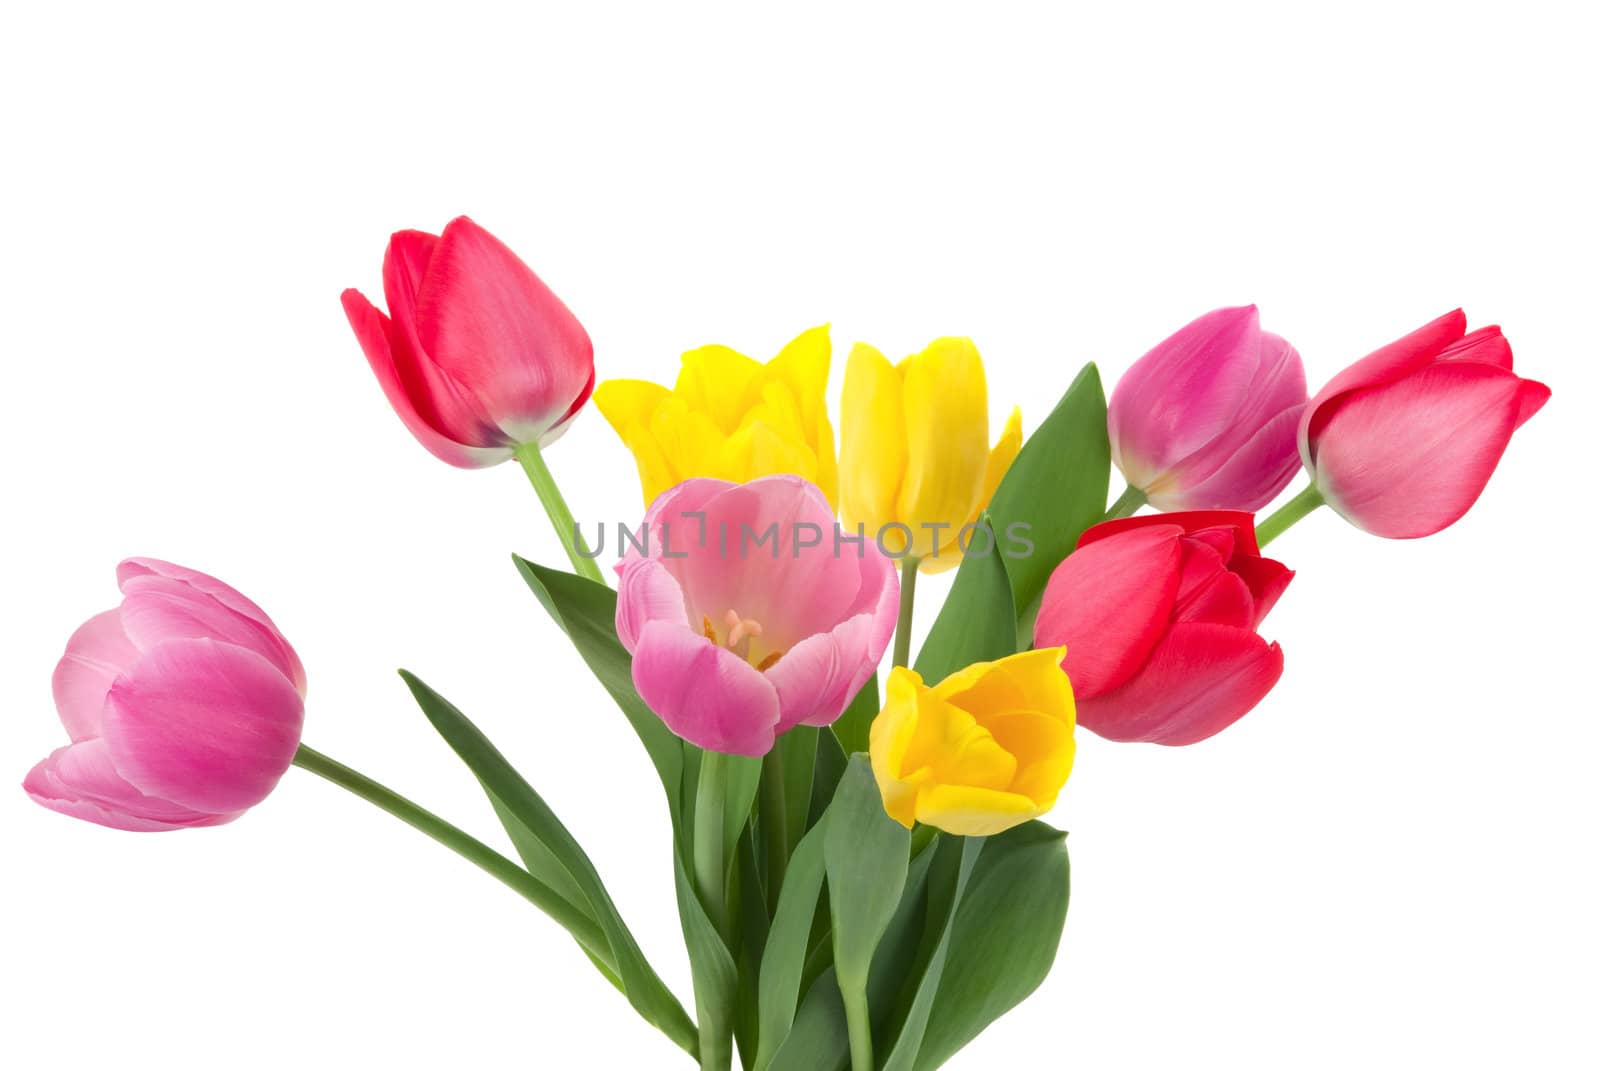 Elegant yellow, red and pink tulips